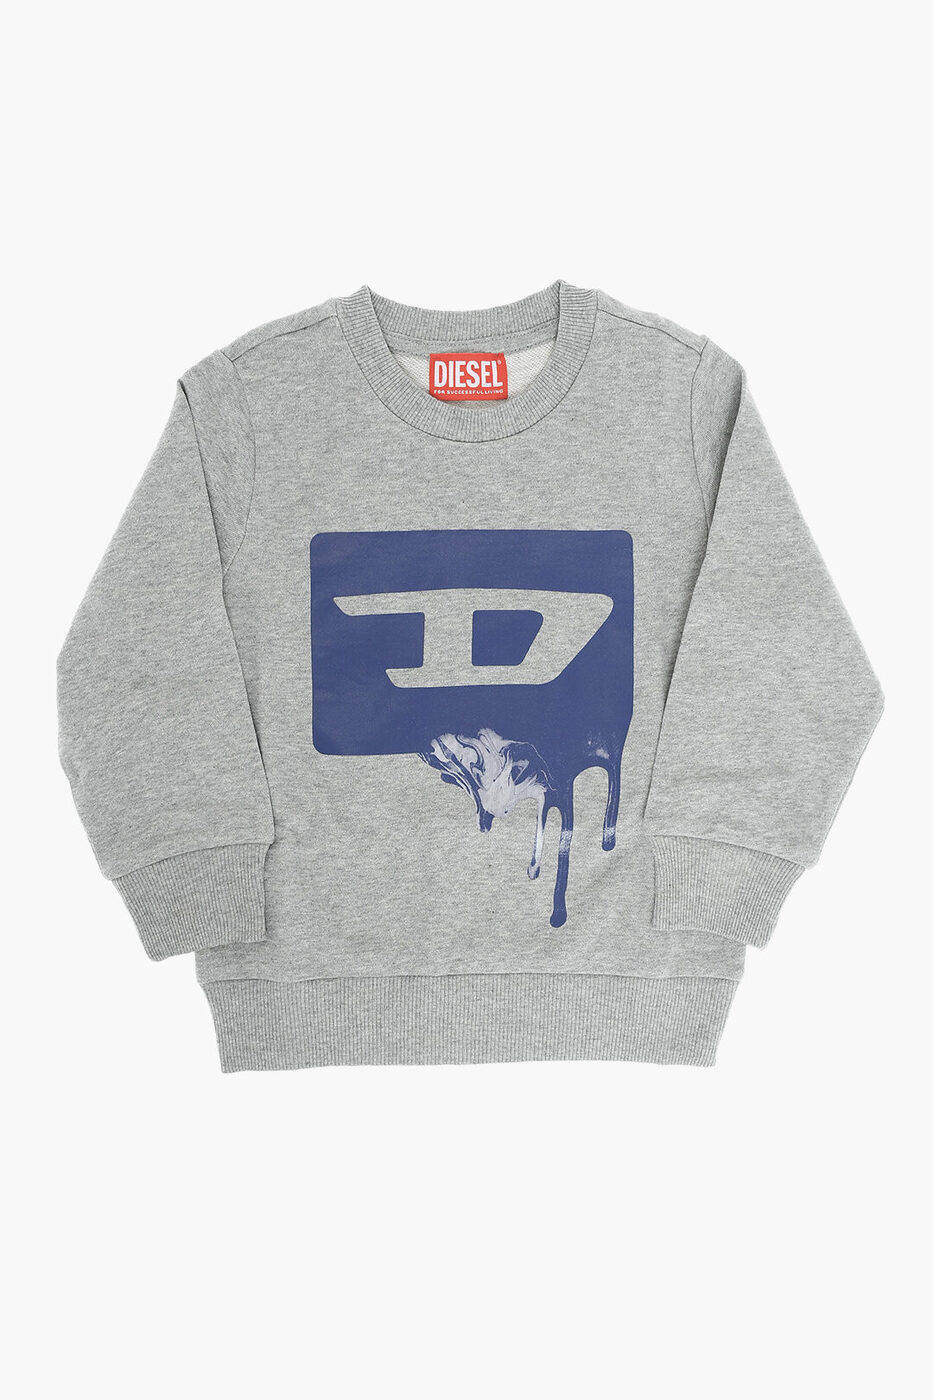 DIESEL ディーゼル スウェット J01866 KYAXI K963 ボーイズ RED TAG BRUSHED COTTON SABLY CREW-NECK S..